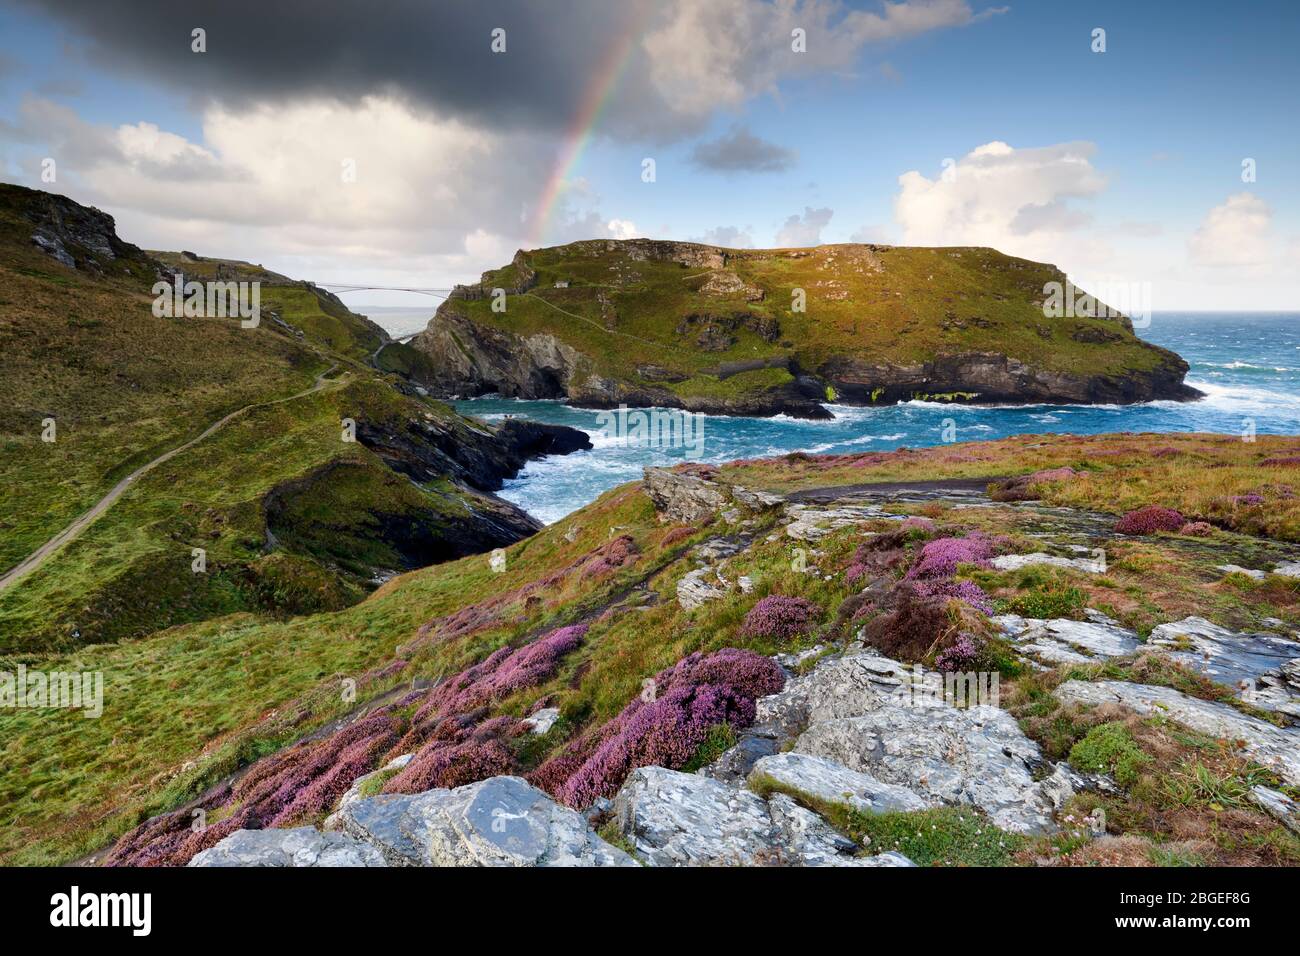 View overlooking Tintagel, connecting the Island with the new bridge crossing. Stock Photo